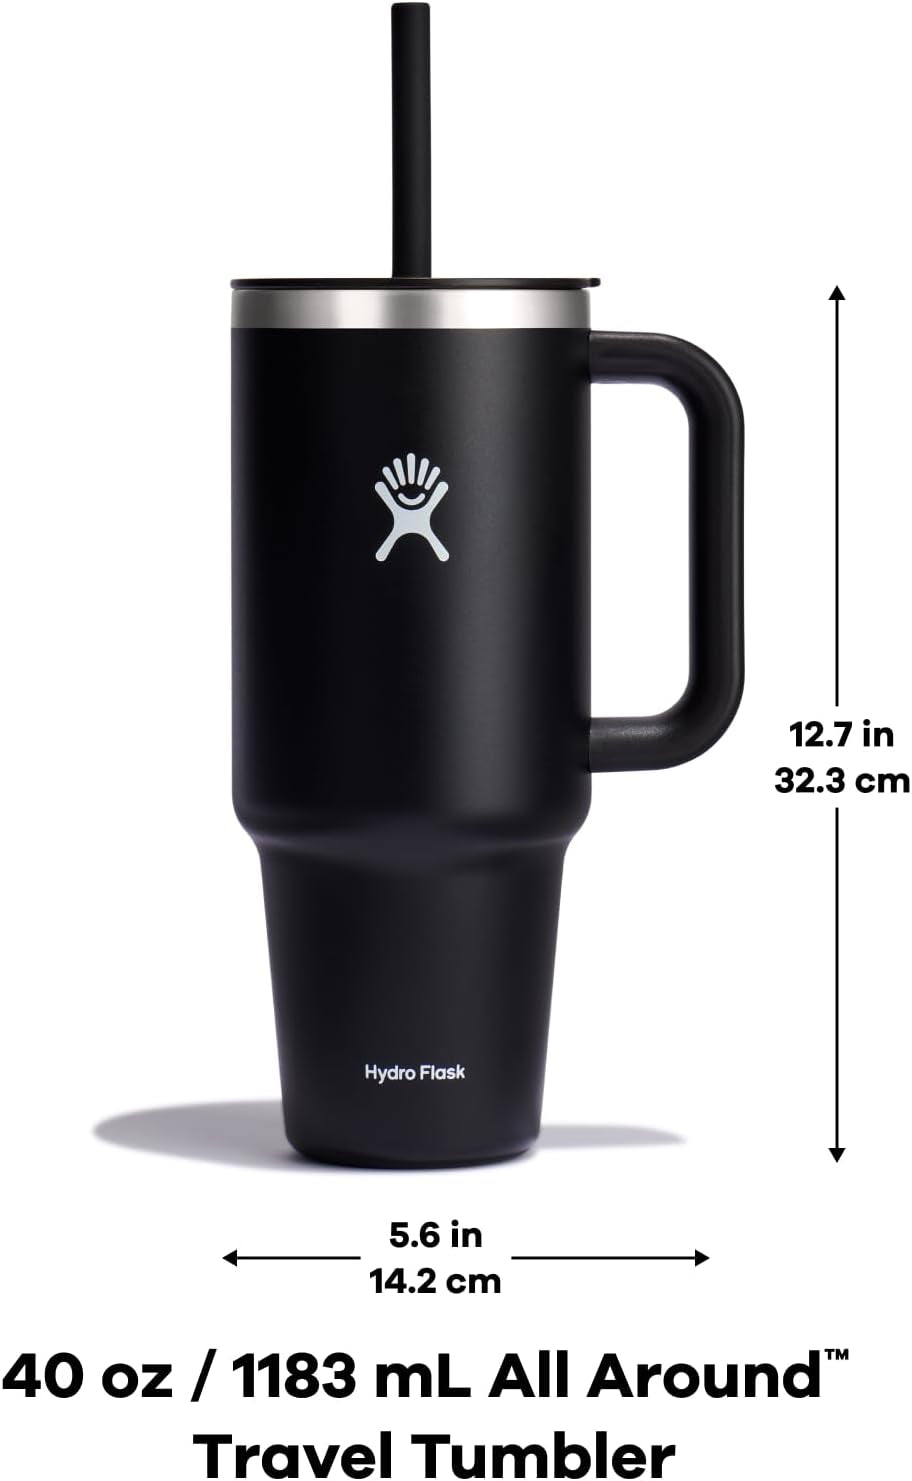 Travel Tumbler Stainless Steel Vacuum Insulated Tumbler with Lid and Straw for Cold Water and Drinks for Sports, School, Work, Car, Travel, Weekends